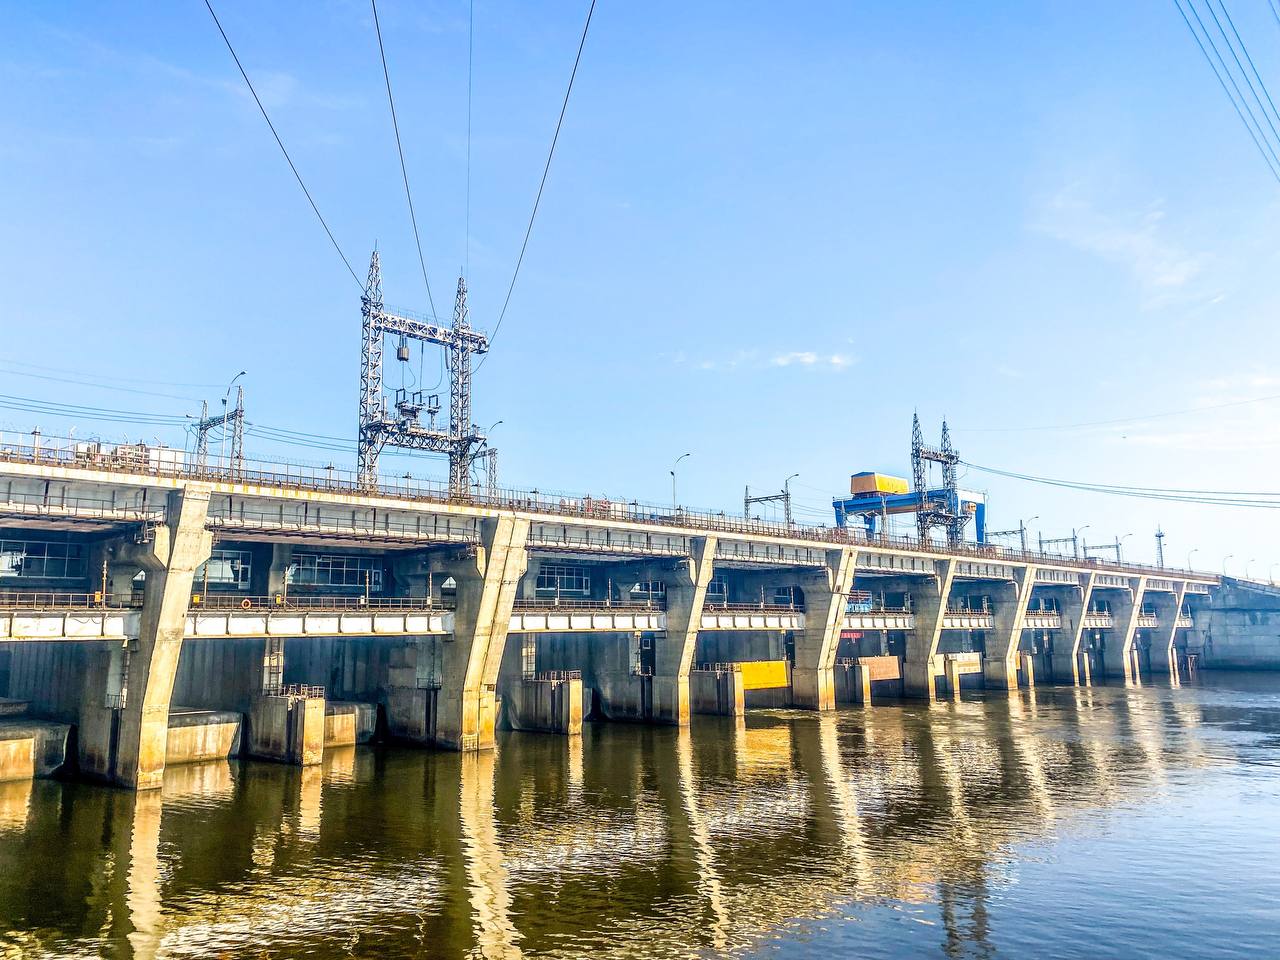 Hydroelectric power plants Ukrhydroenergo once again ensured the reliable operation of Ukraine's power system